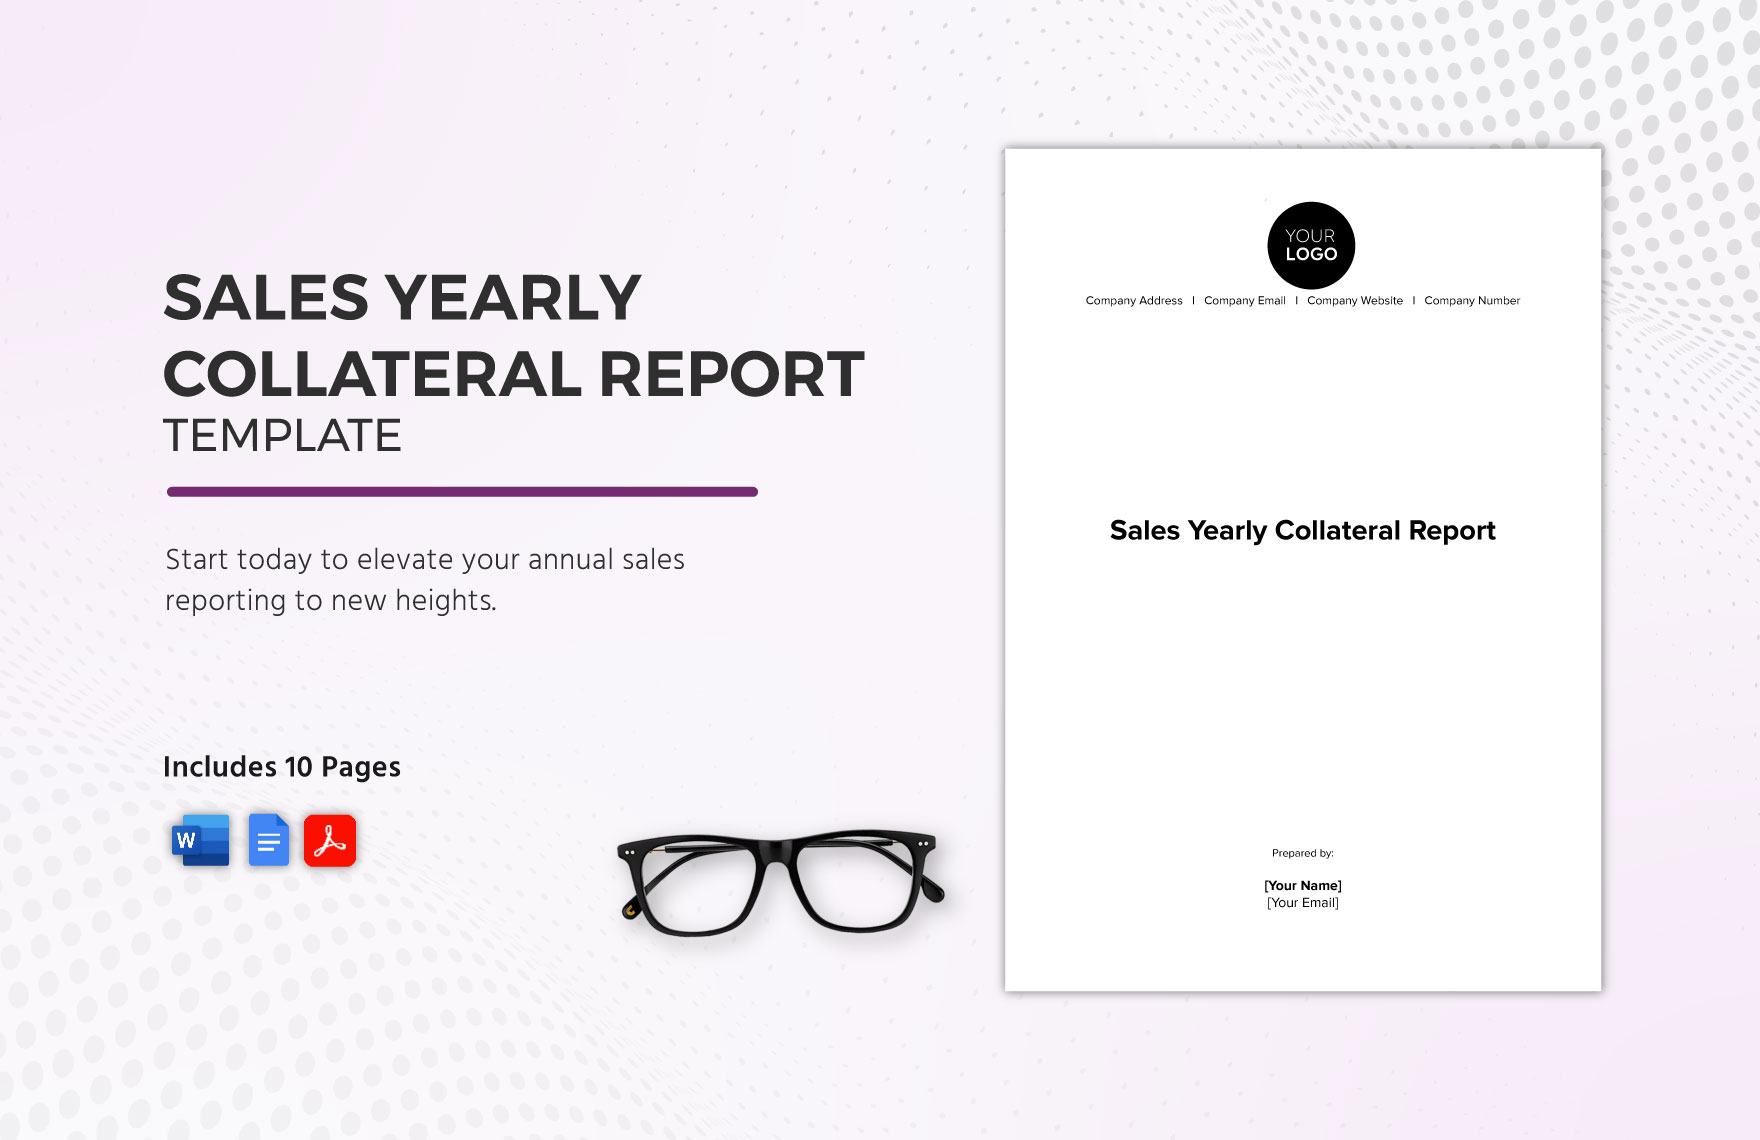 Sales Yearly Collateral Report Template